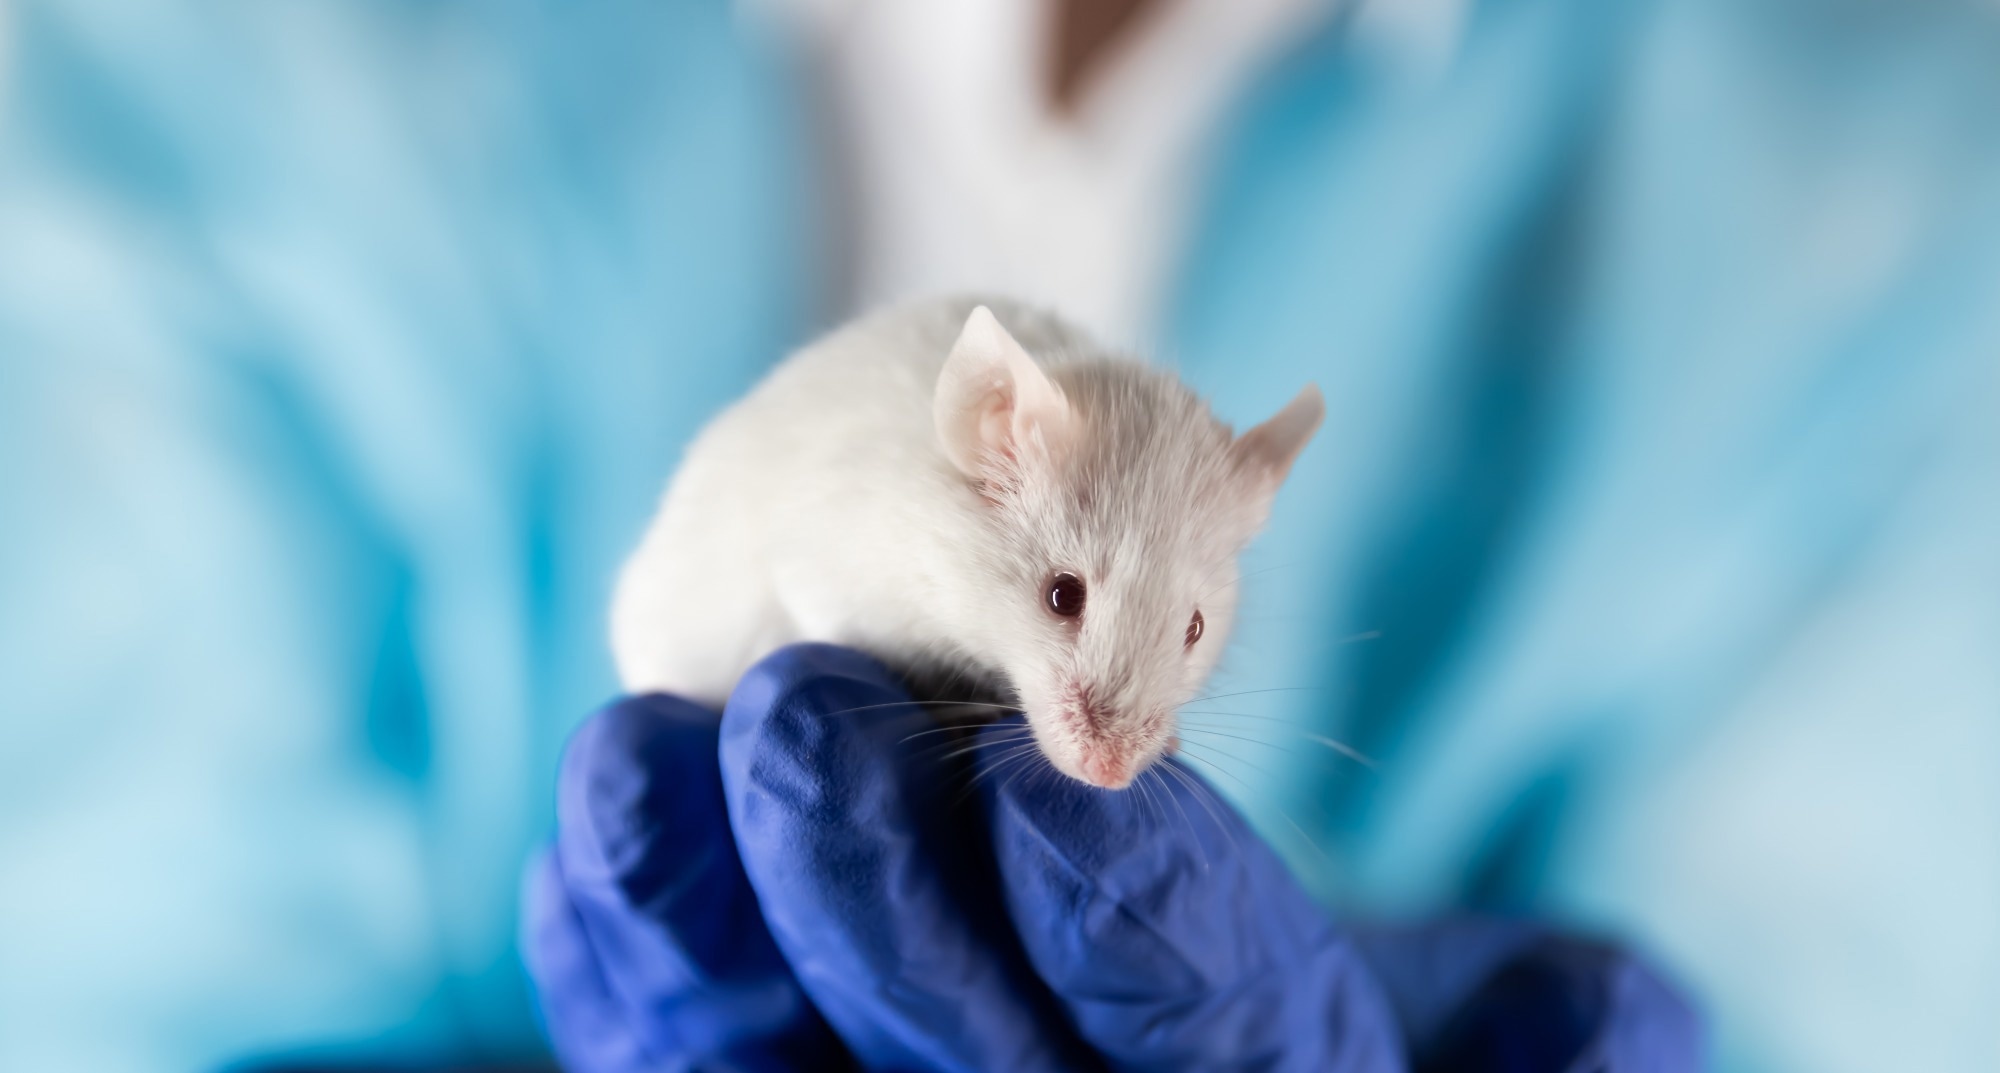 Study: Gene Therapy Mediated Partial Reprogramming Extends Lifespan and Reverses Age-Related Changes in Aged Mice. Image Credit: javirozas/Shutterstock